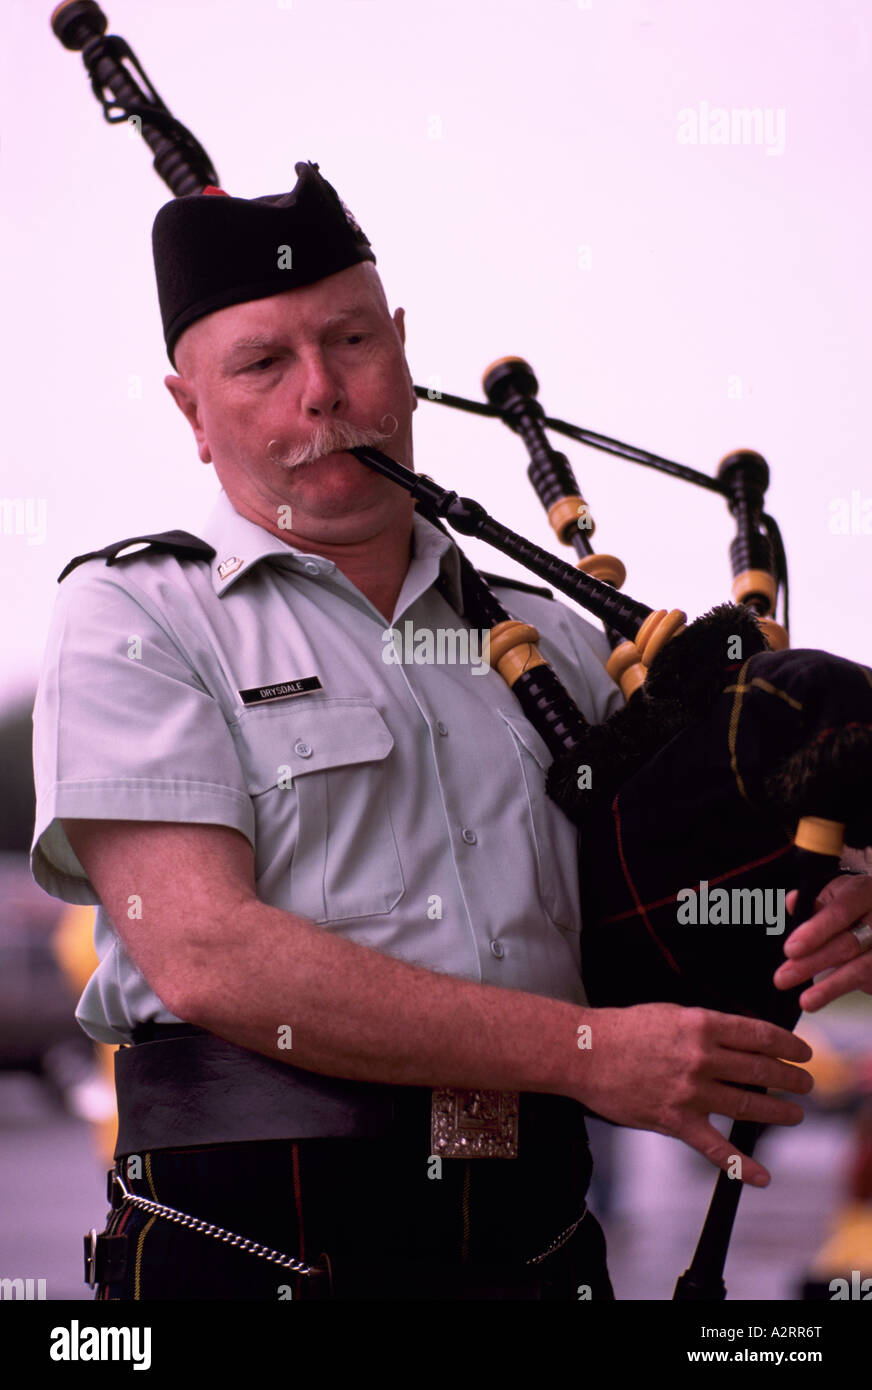 A Senior Man playing the Bagpipes Stock Photo